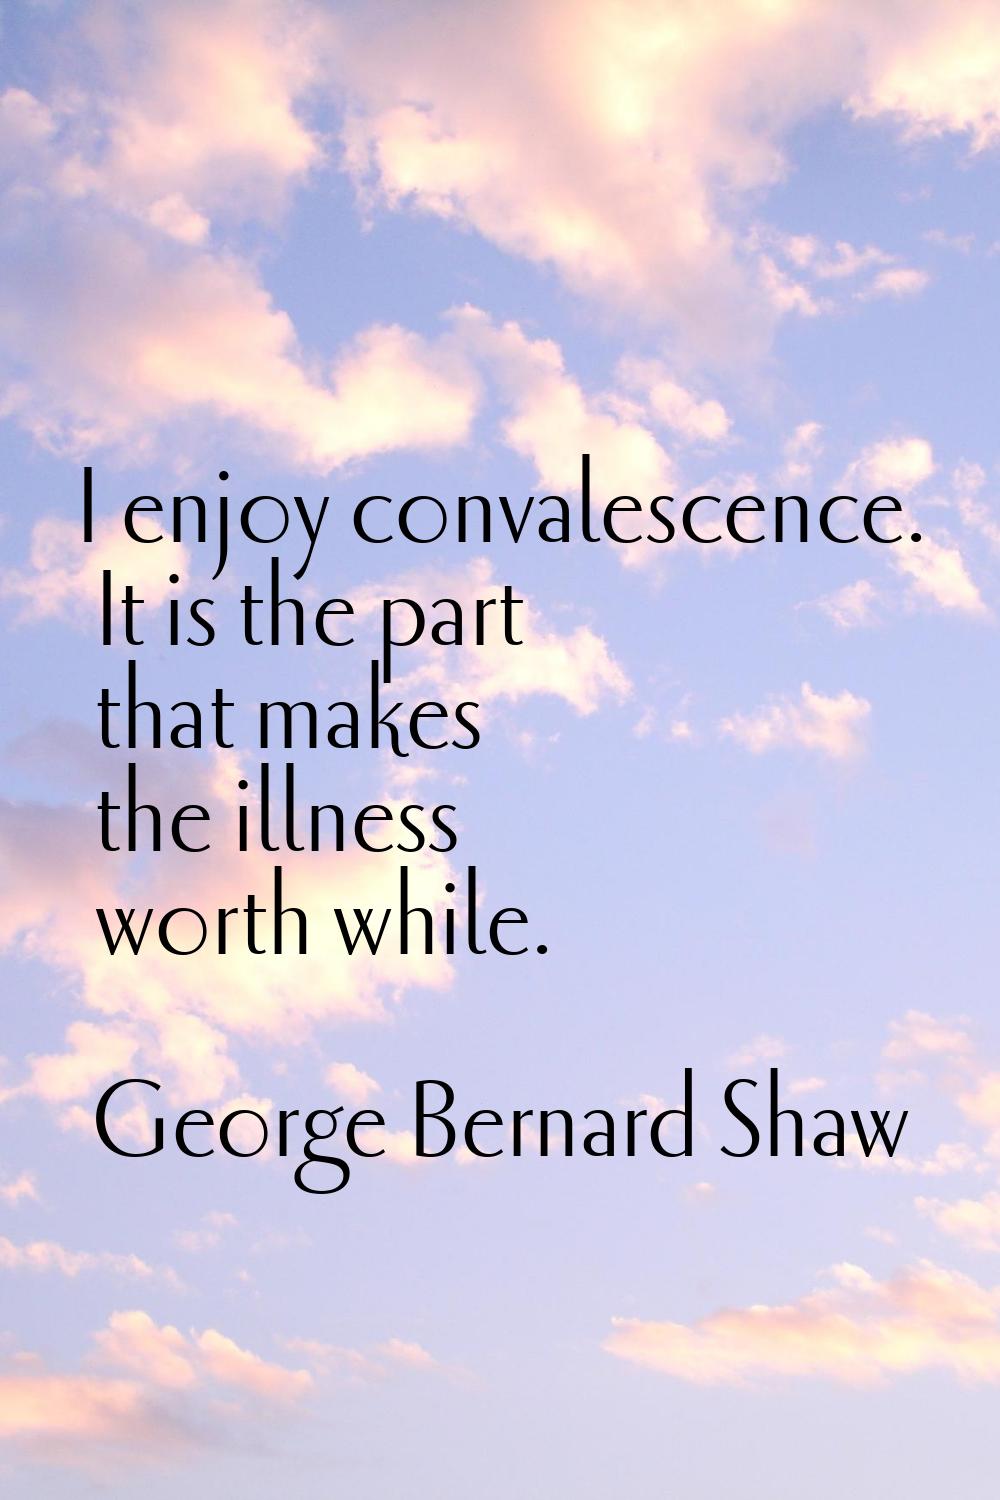 I enjoy convalescence. It is the part that makes the illness worth while.